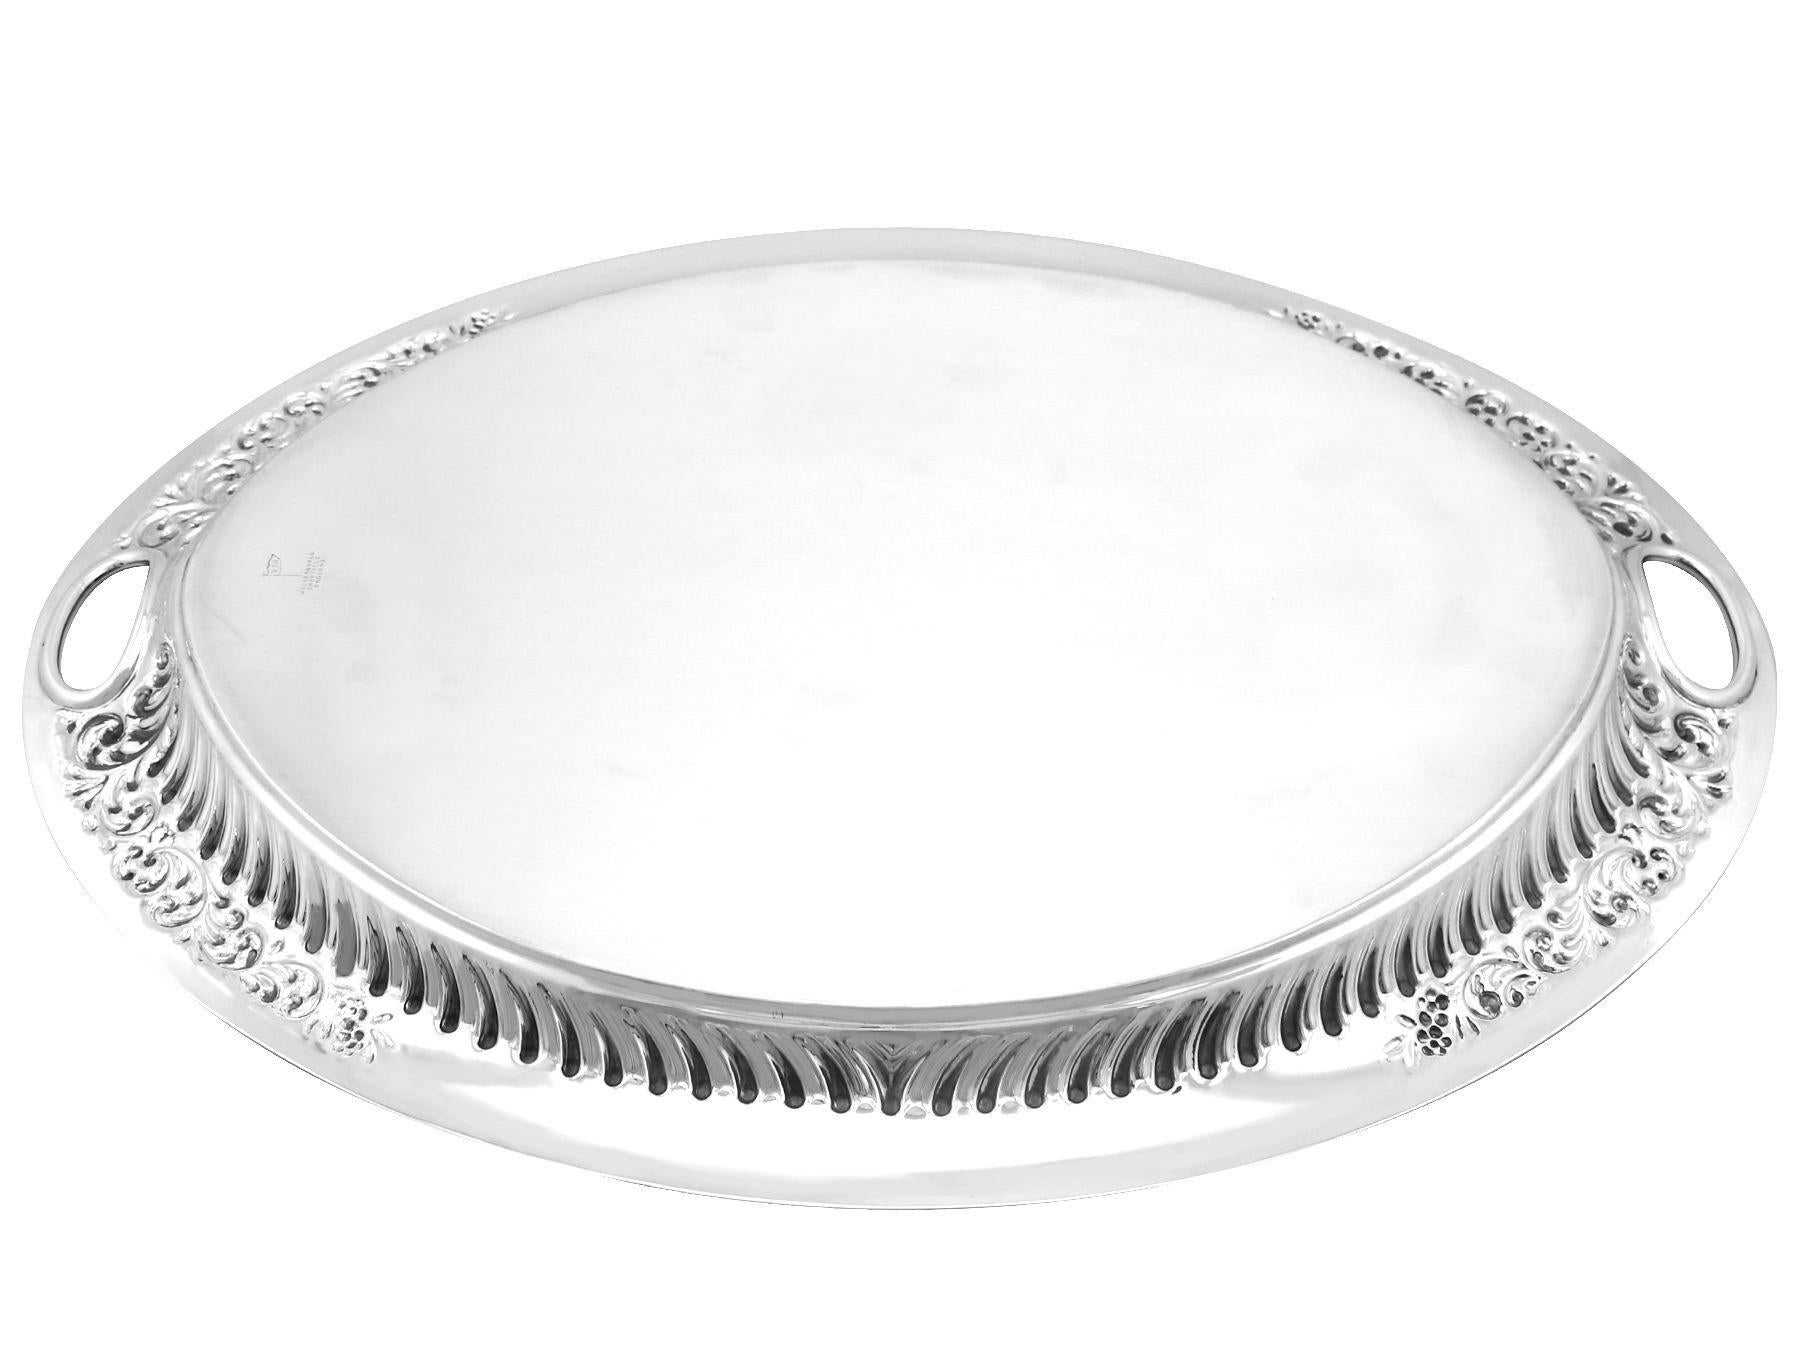 Antique Victorian Sterling Silver Galleried Tea Tray For Sale 3